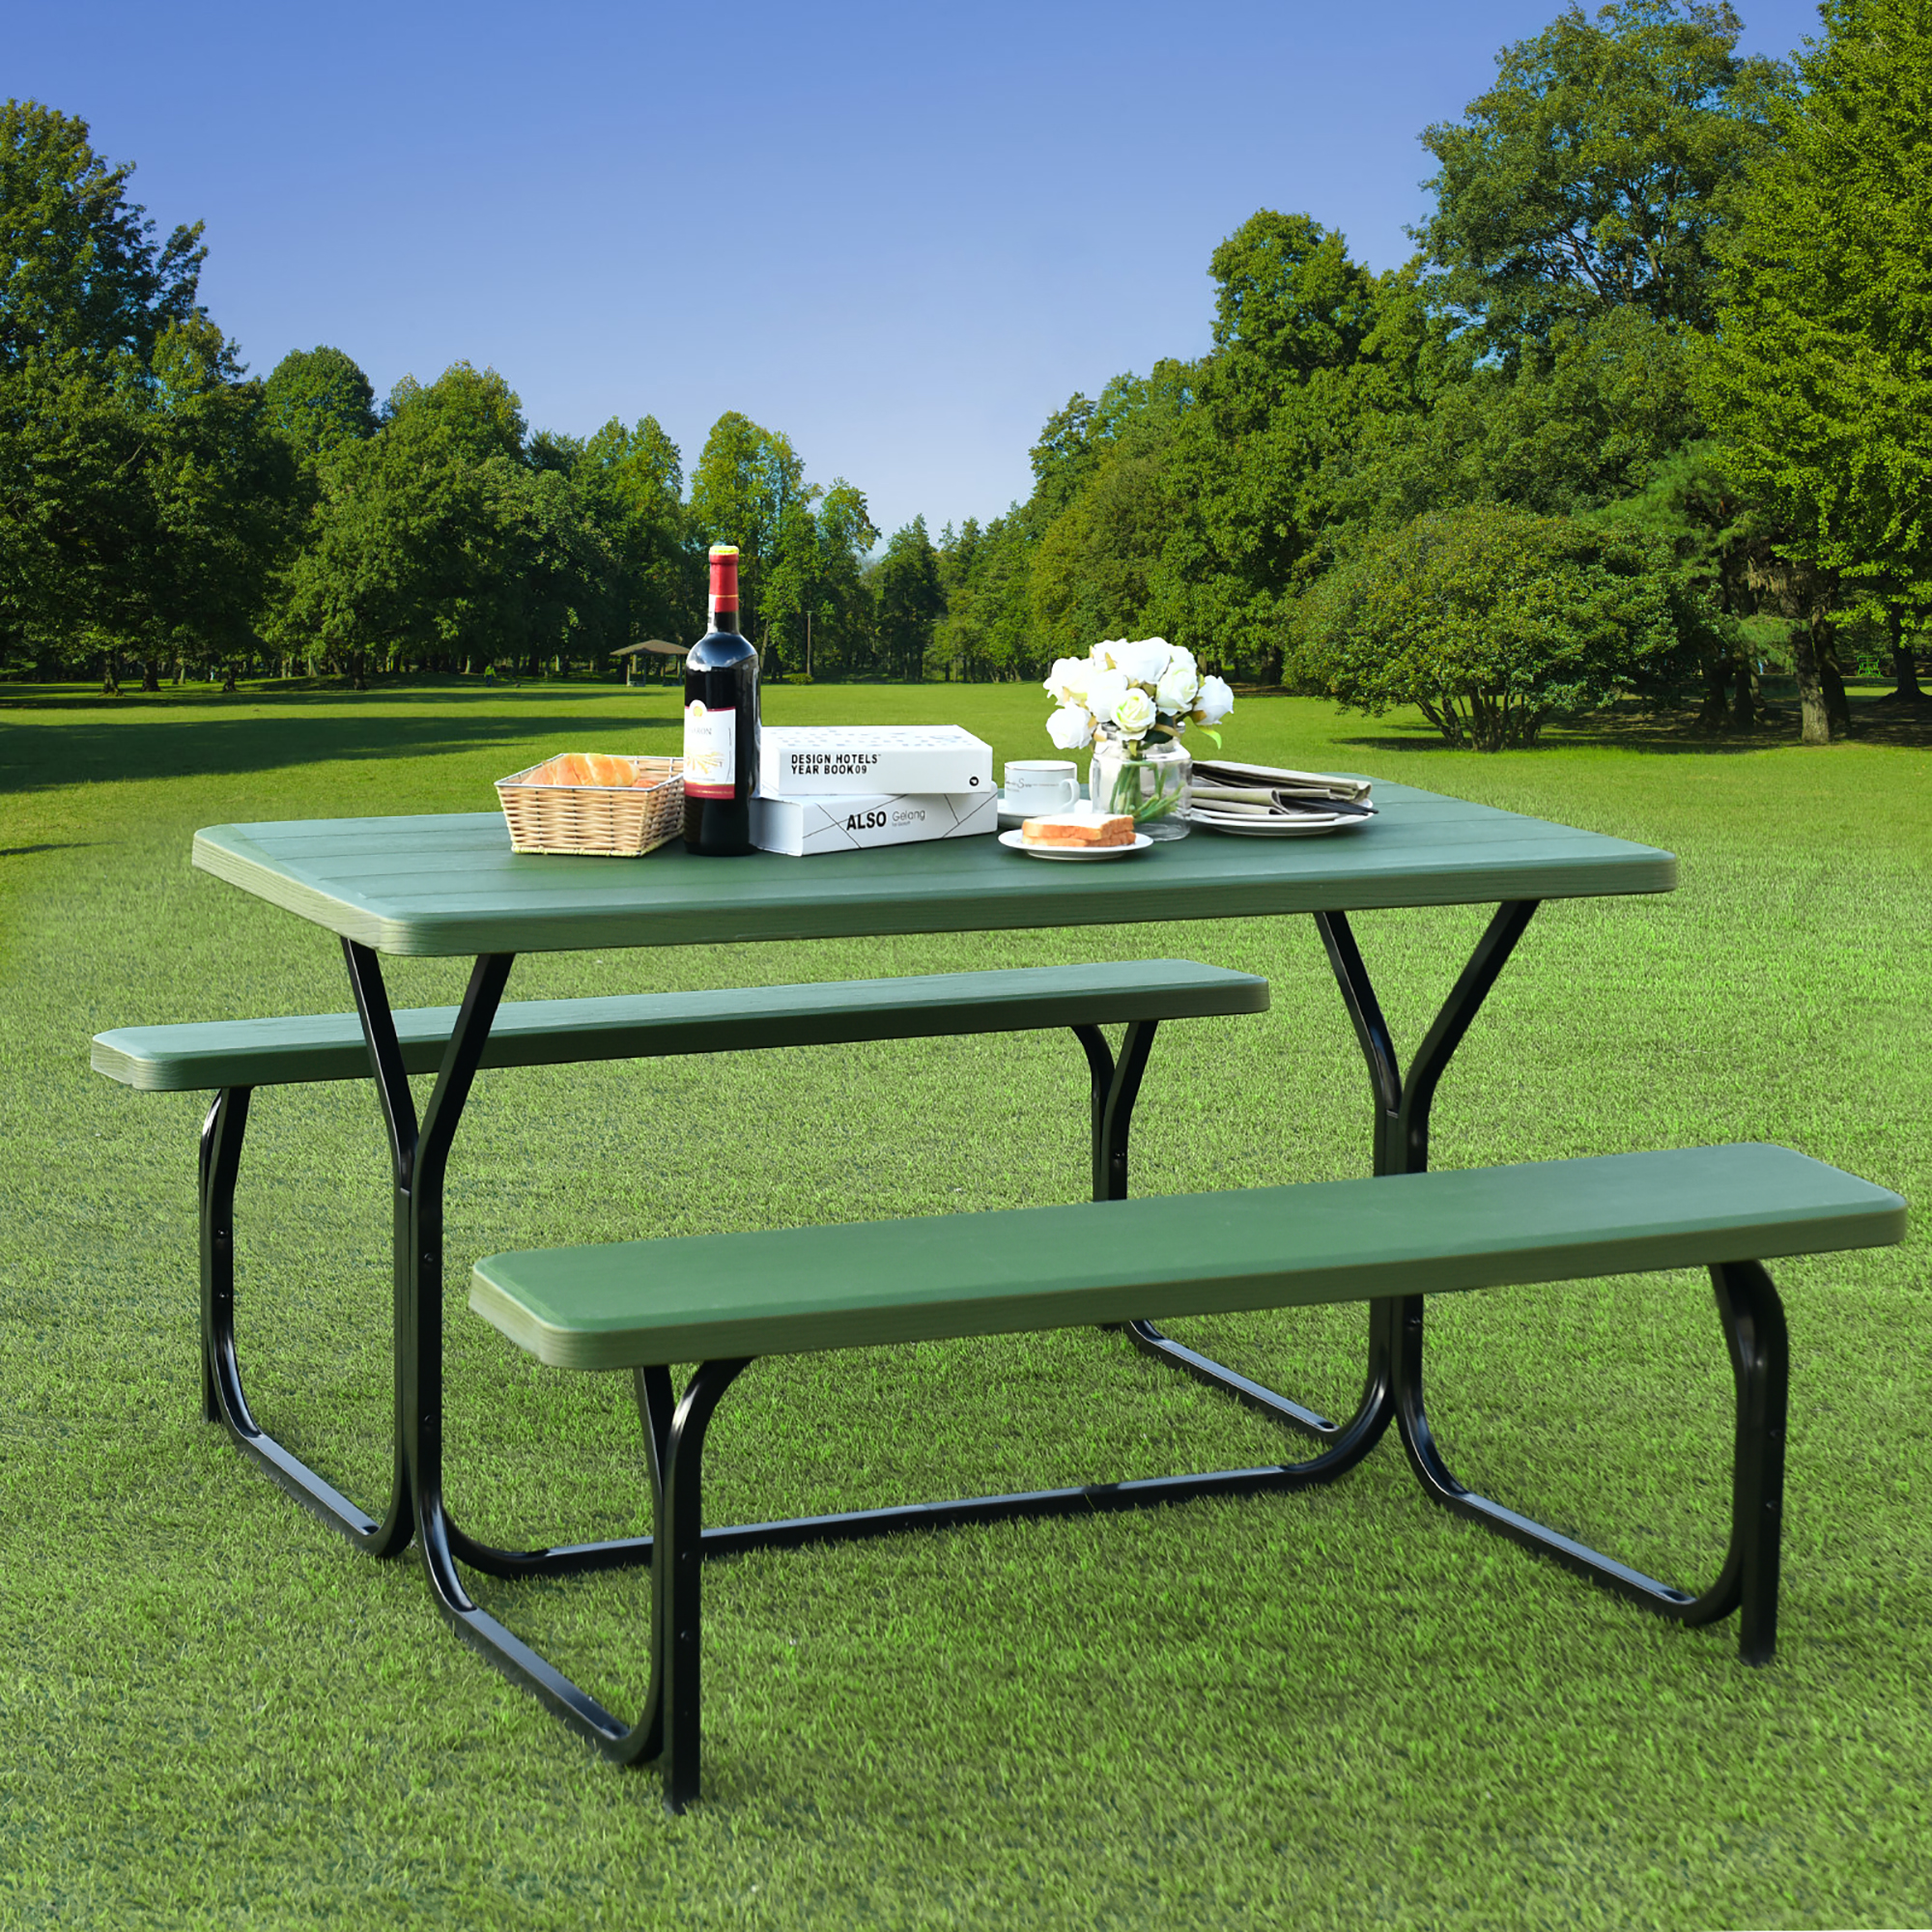 Costway Picnic Table Bench Set Outdoor Backyard Patio Garden Party Dining All Weather Green - image 1 of 10